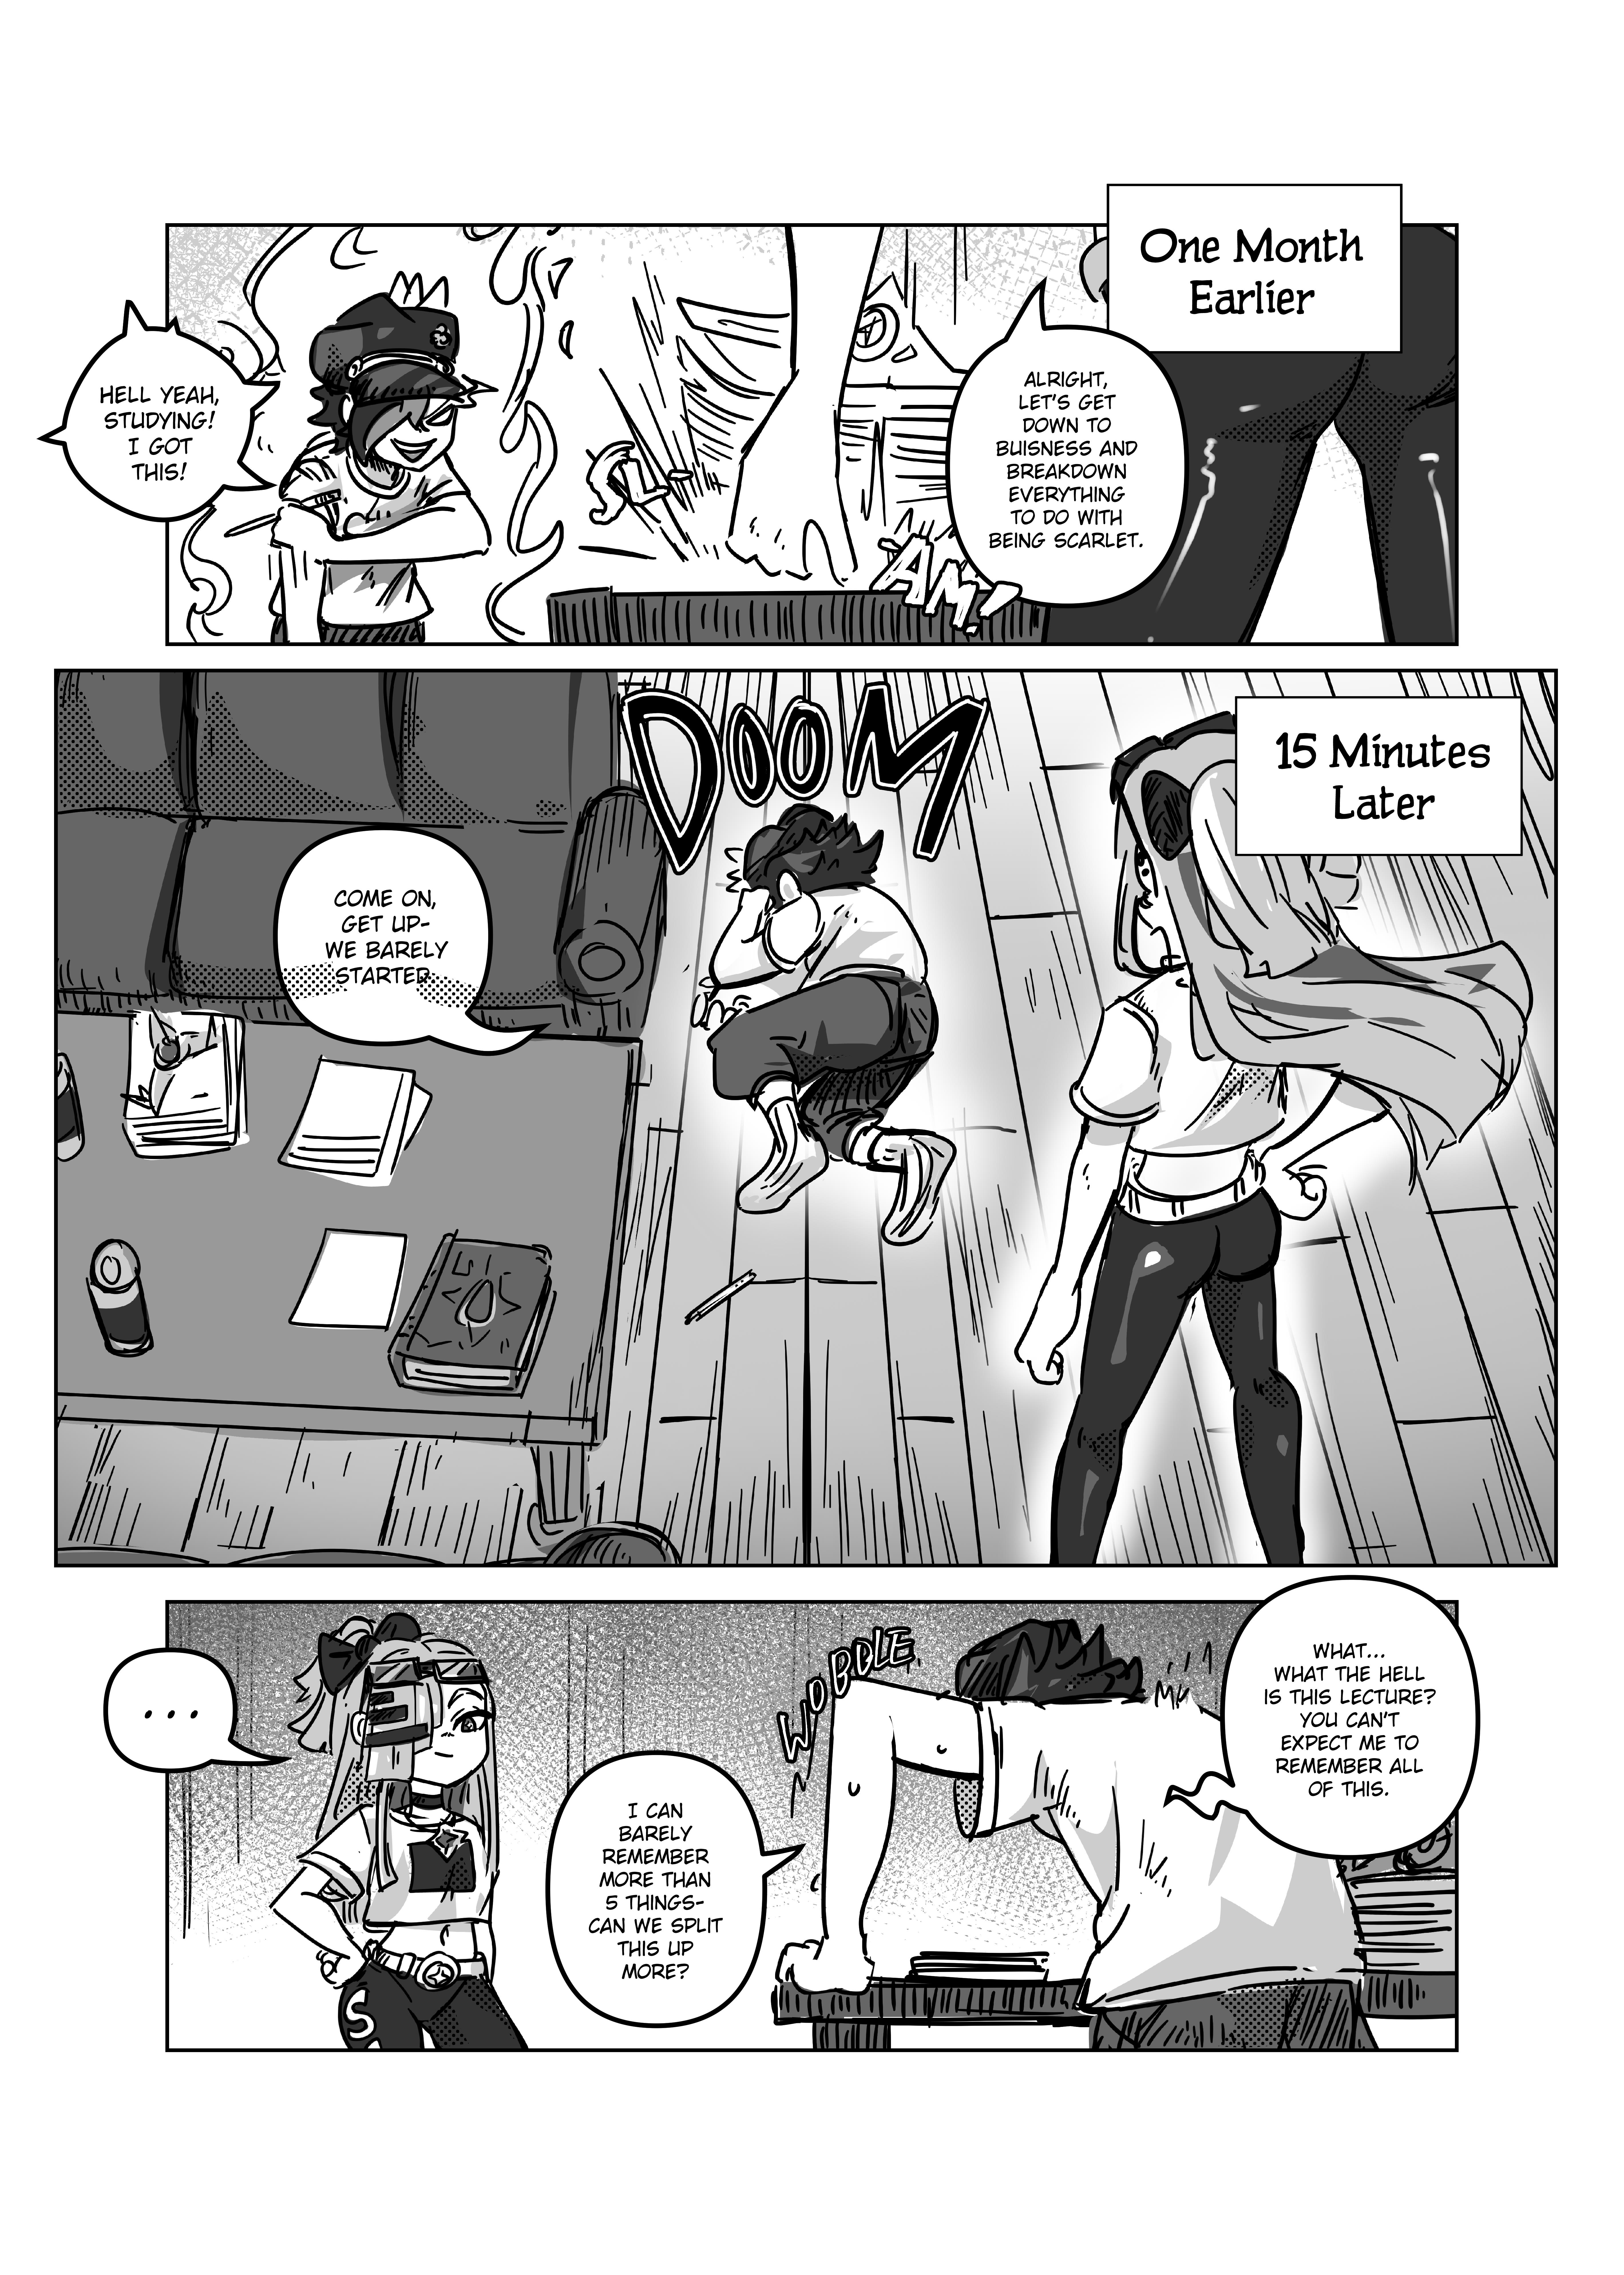 Scarlet Star - Page 2